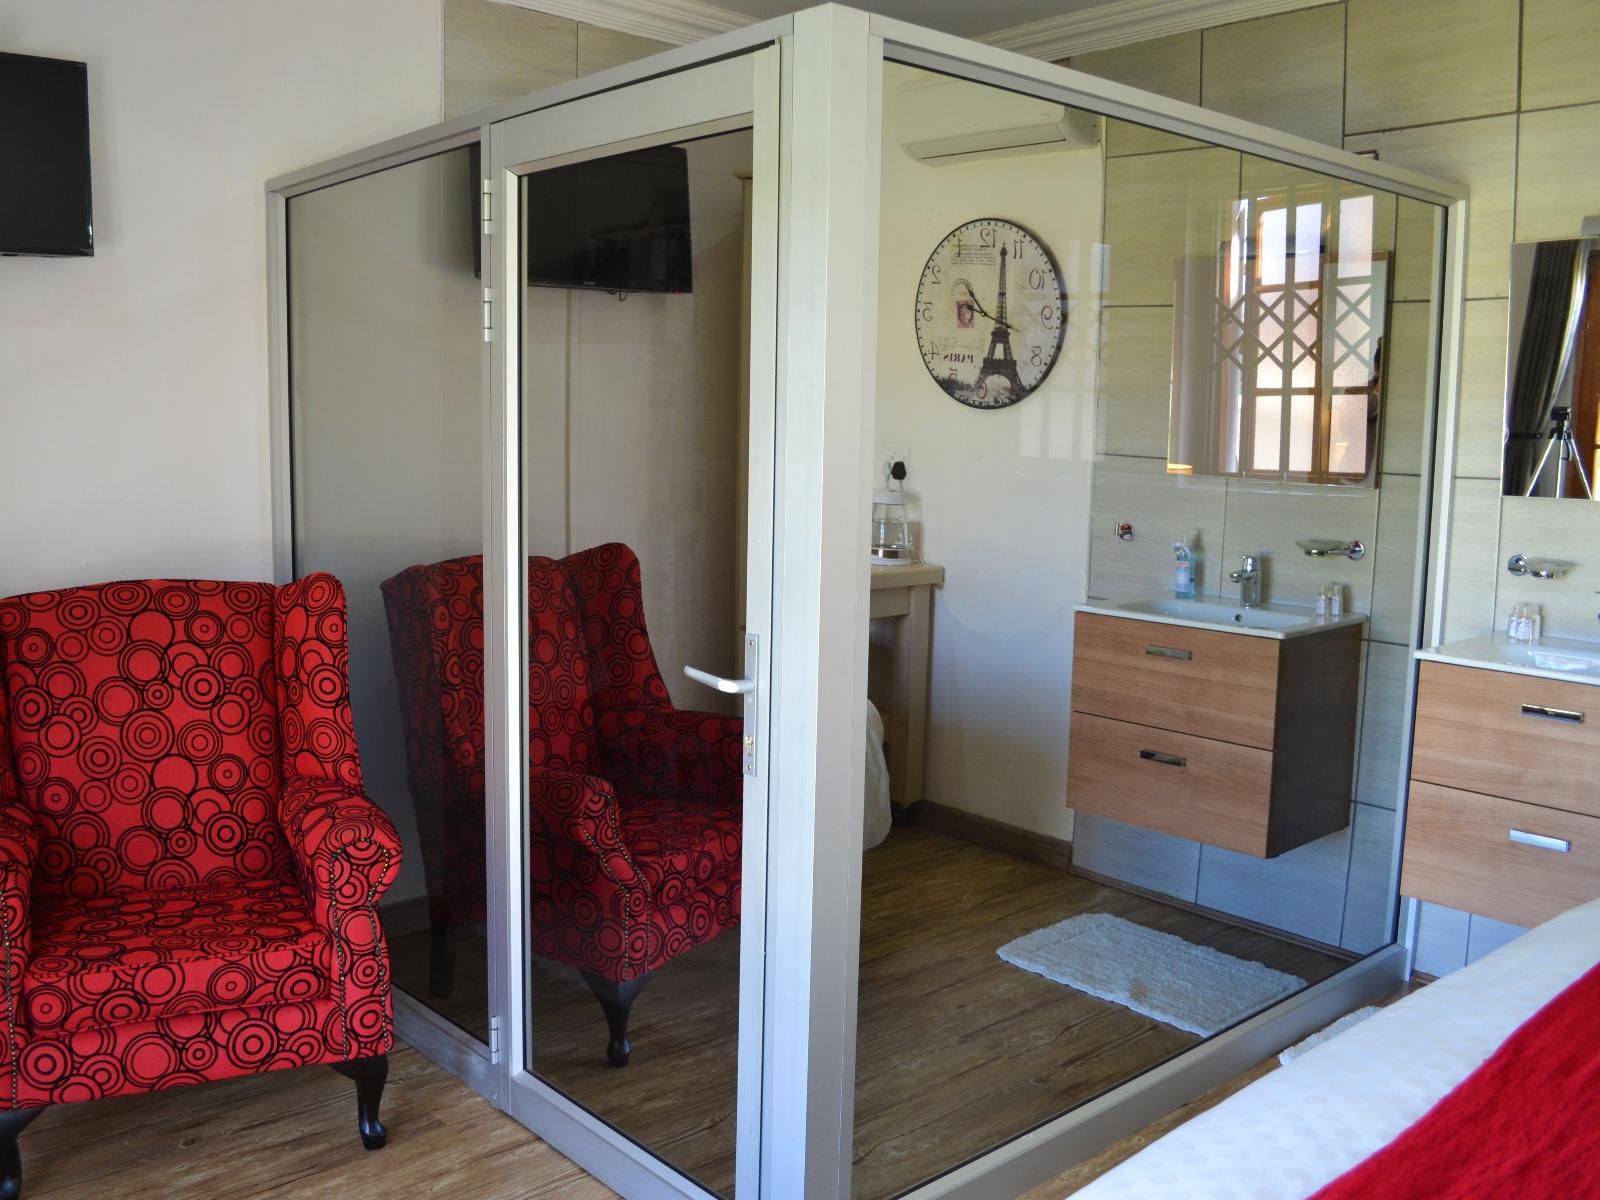 96 On Bree Guesthouse Heilbron Free State South Africa Door, Architecture